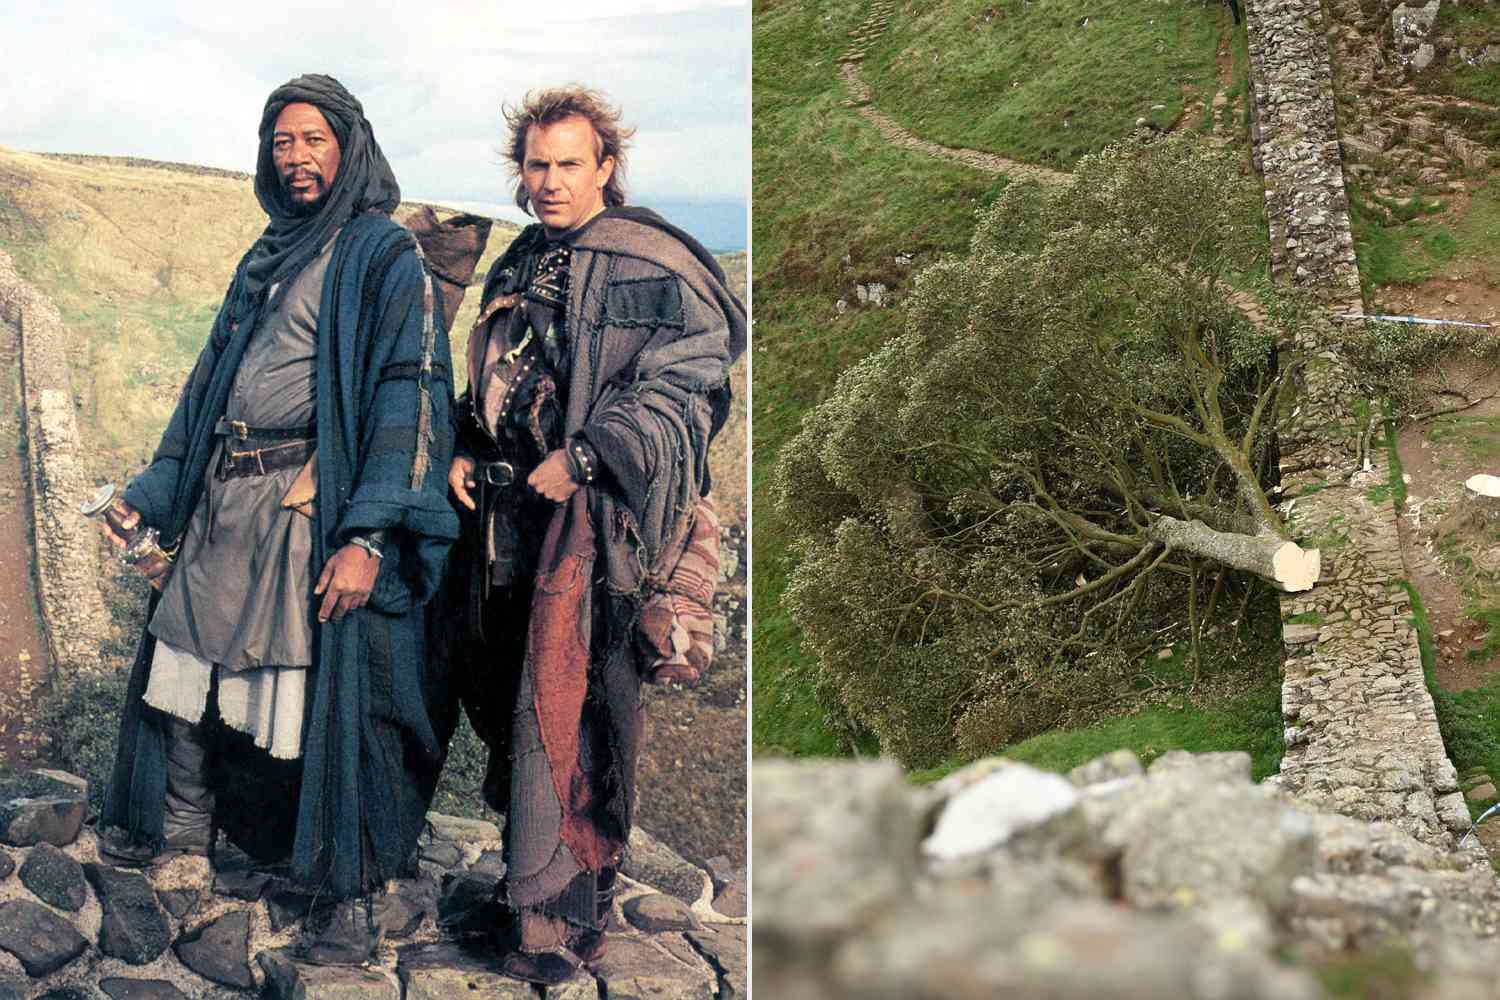 2 Men Charged with Chopping Down Iconic Sycamore Tree Featured in Kevin Costner's “Robin Hood ”Film